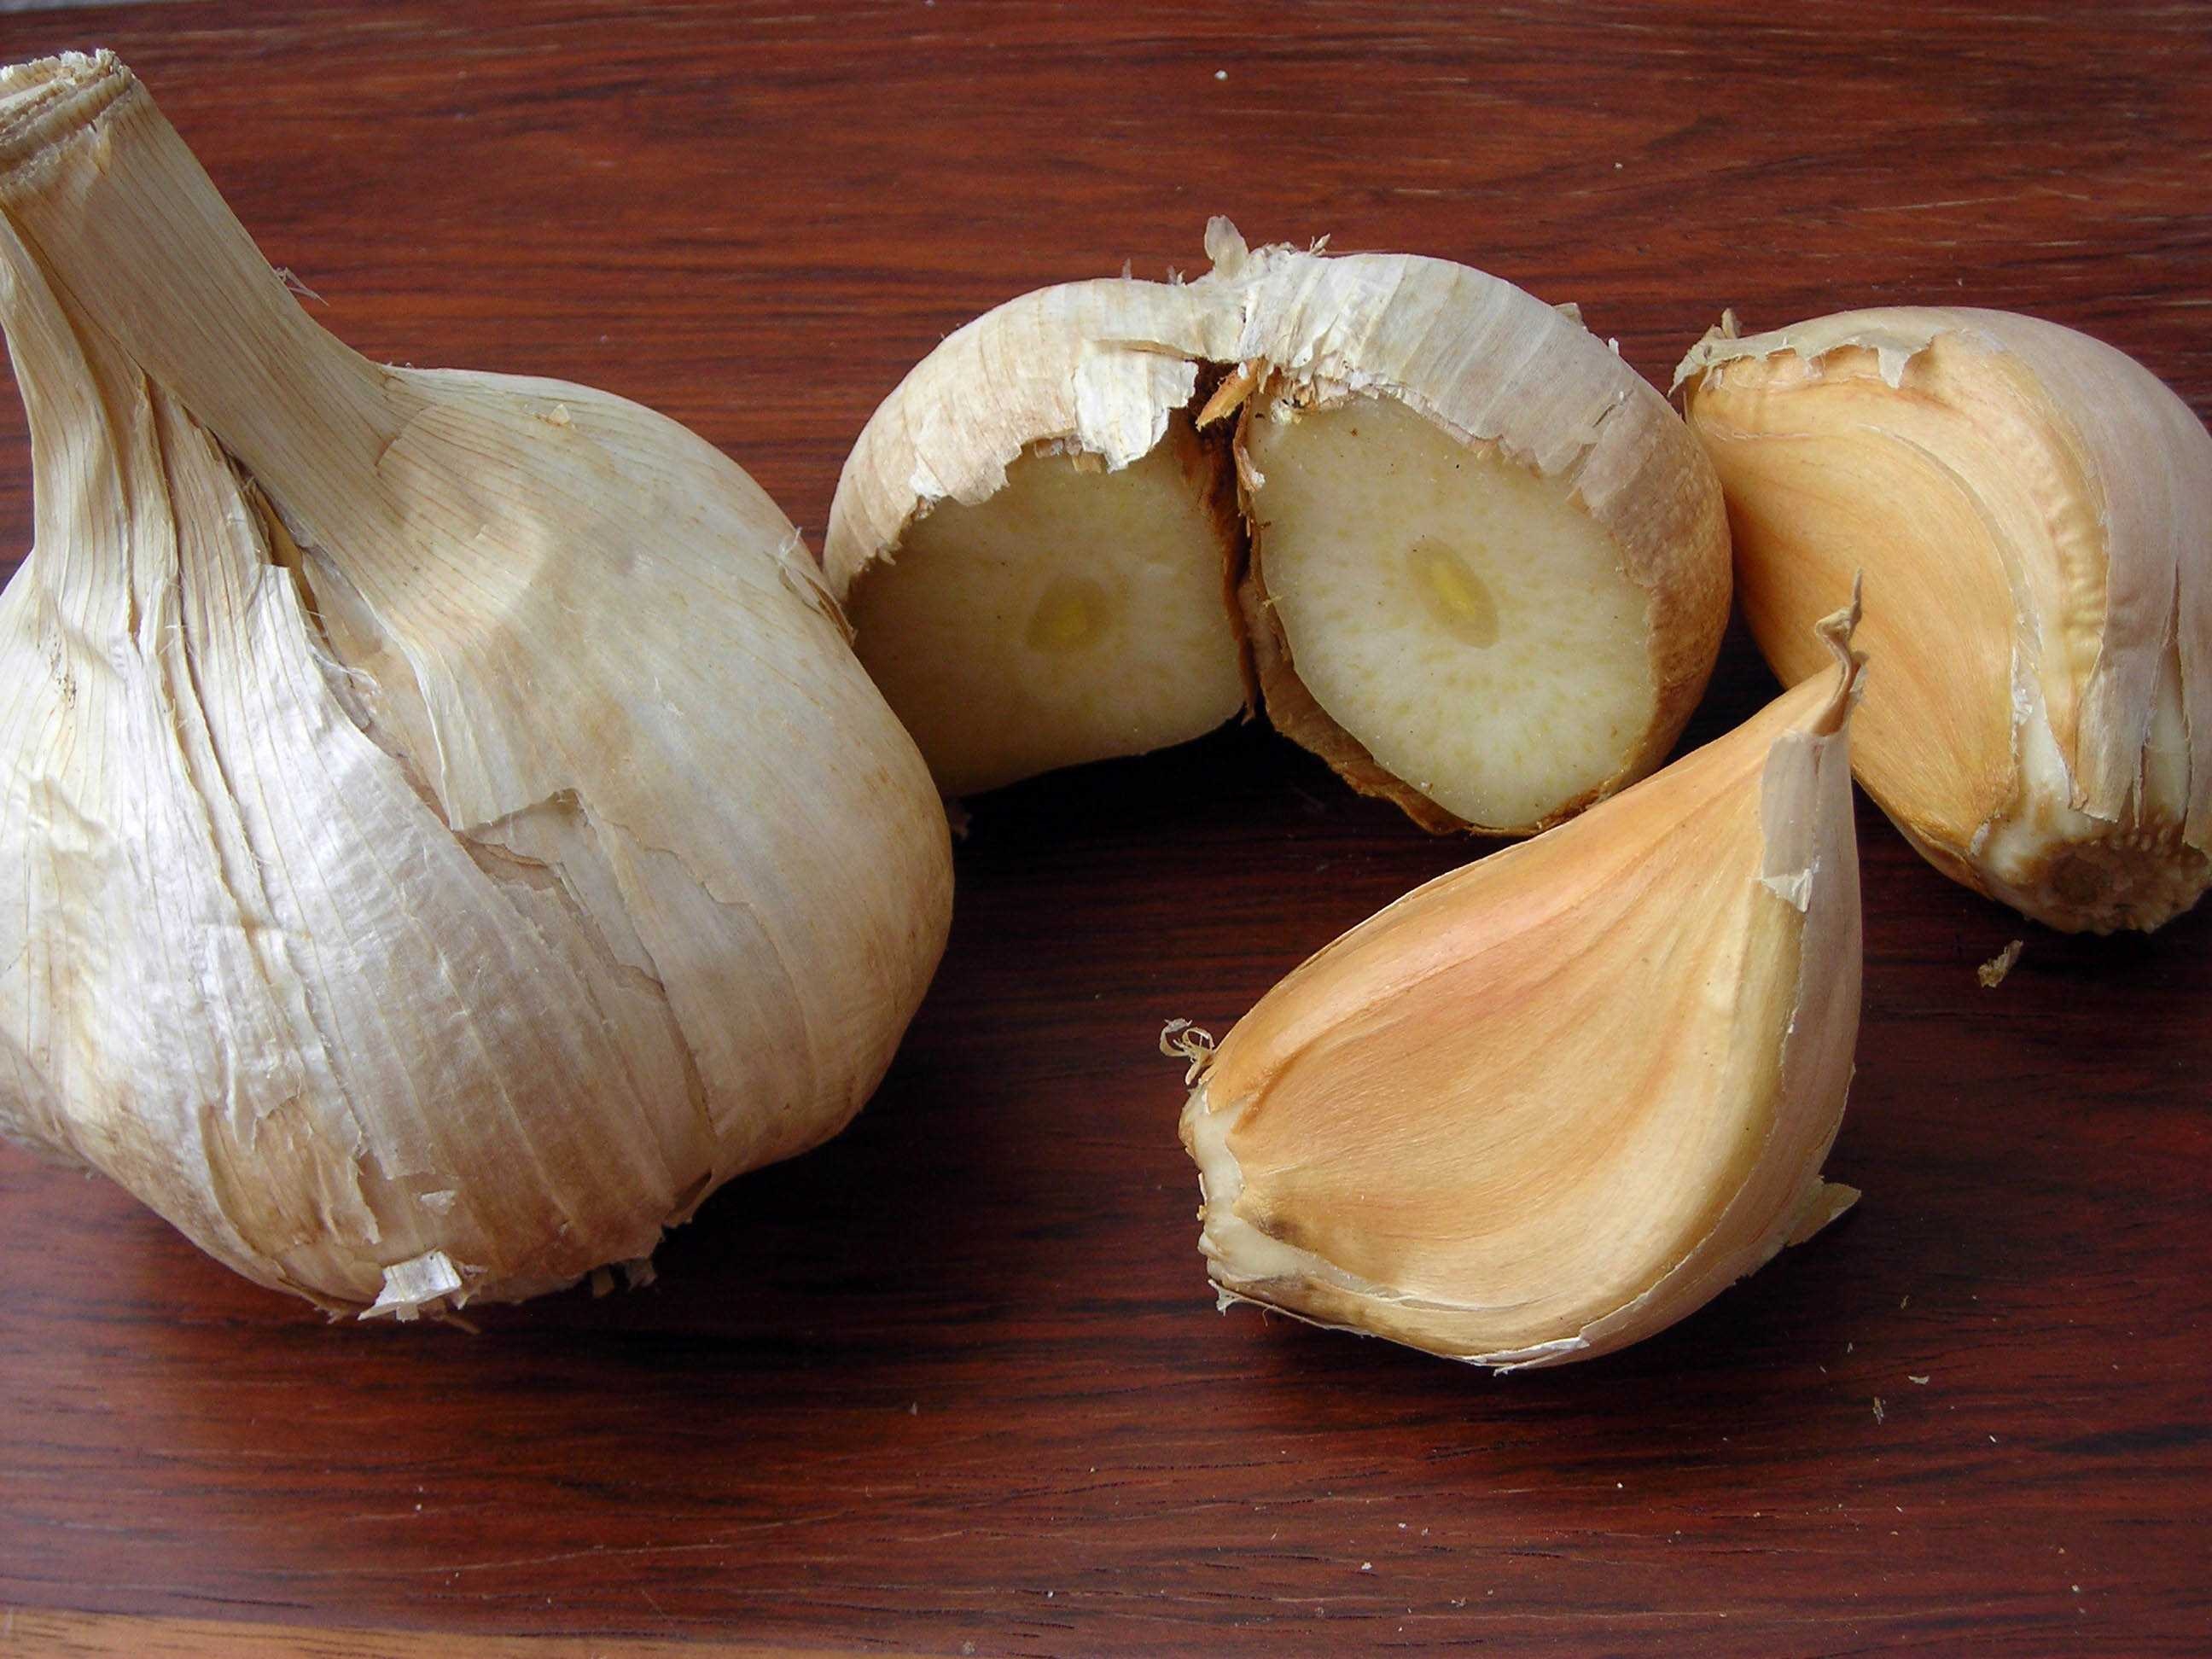 Garlic image classifcation dataset for machine learning